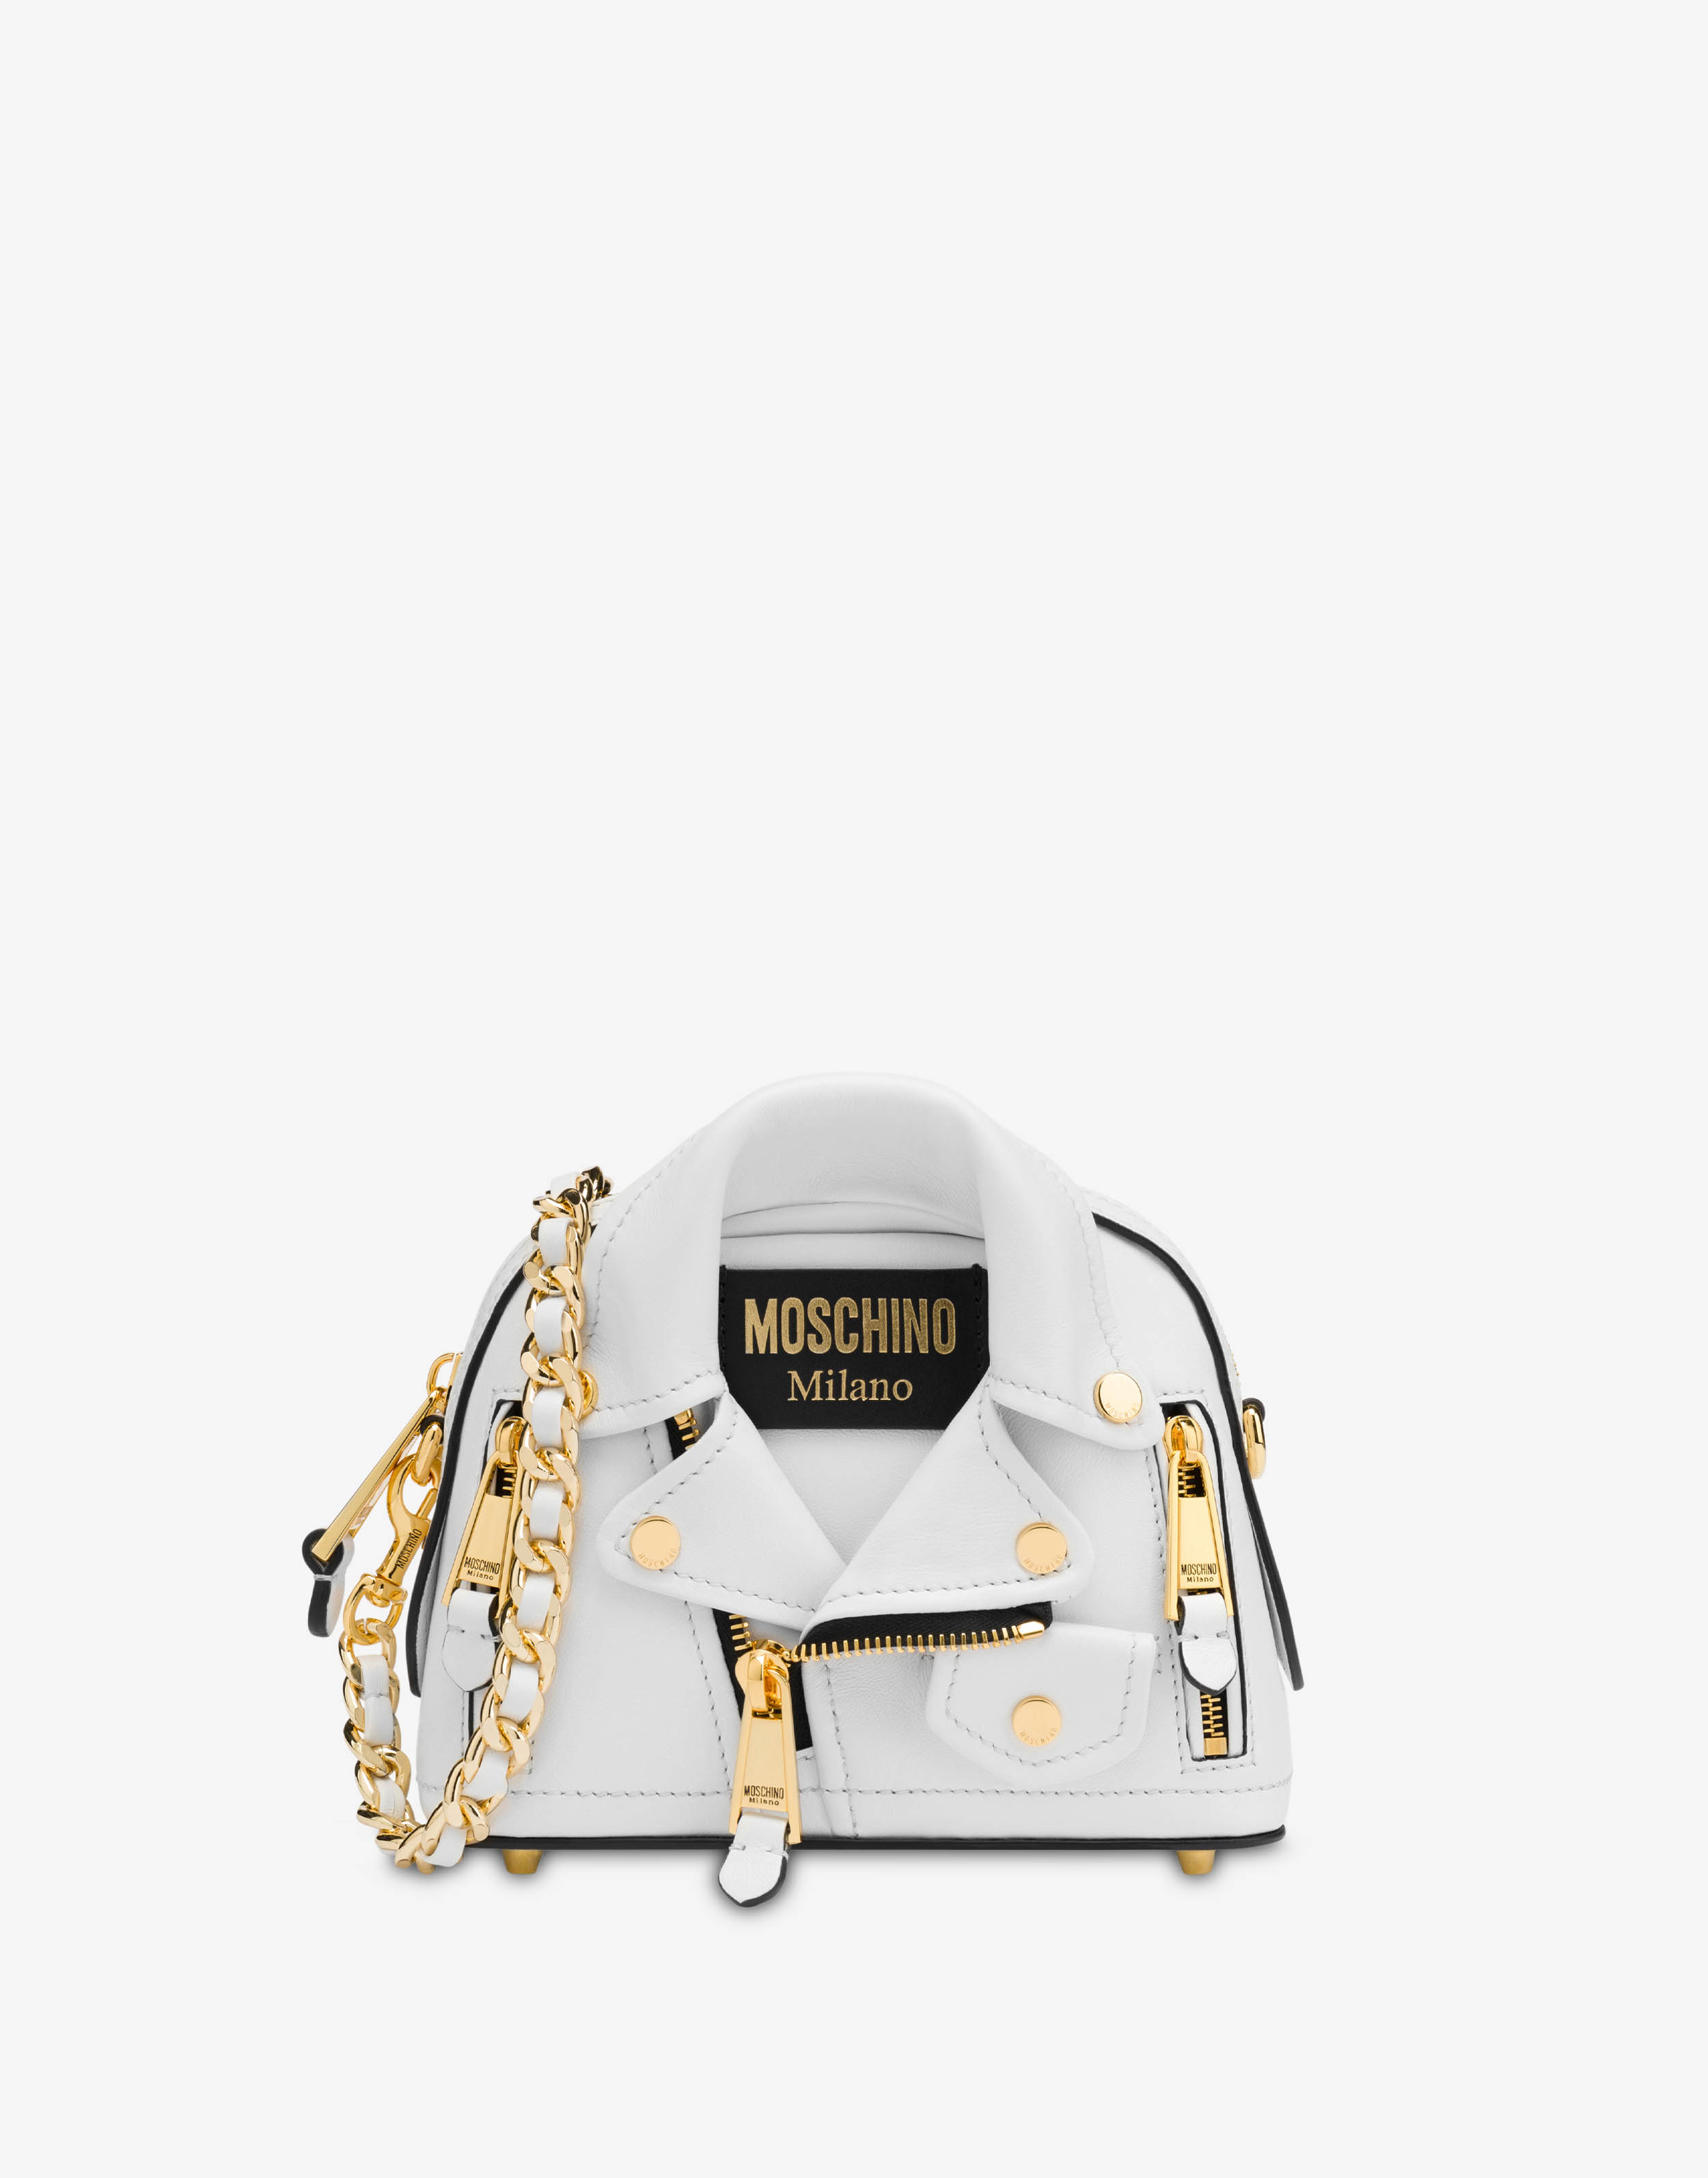 Moschino Leather Patterned Handle Bag - Pink Handle Bags, Handbags -  MOS68326 | The RealReal